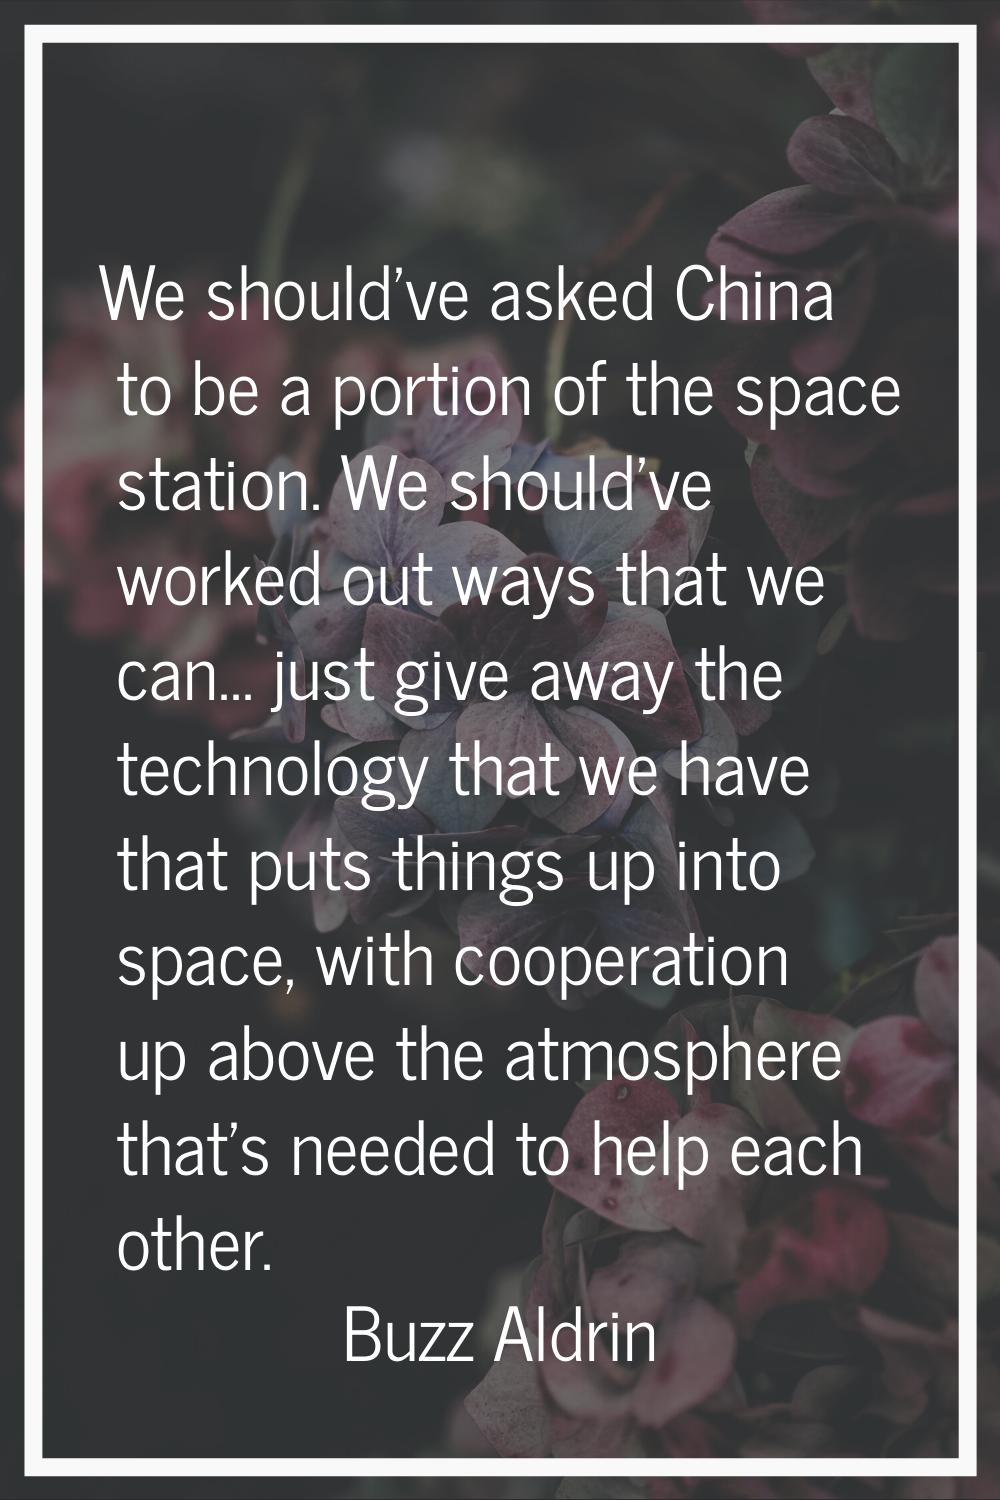 We should've asked China to be a portion of the space station. We should've worked out ways that we